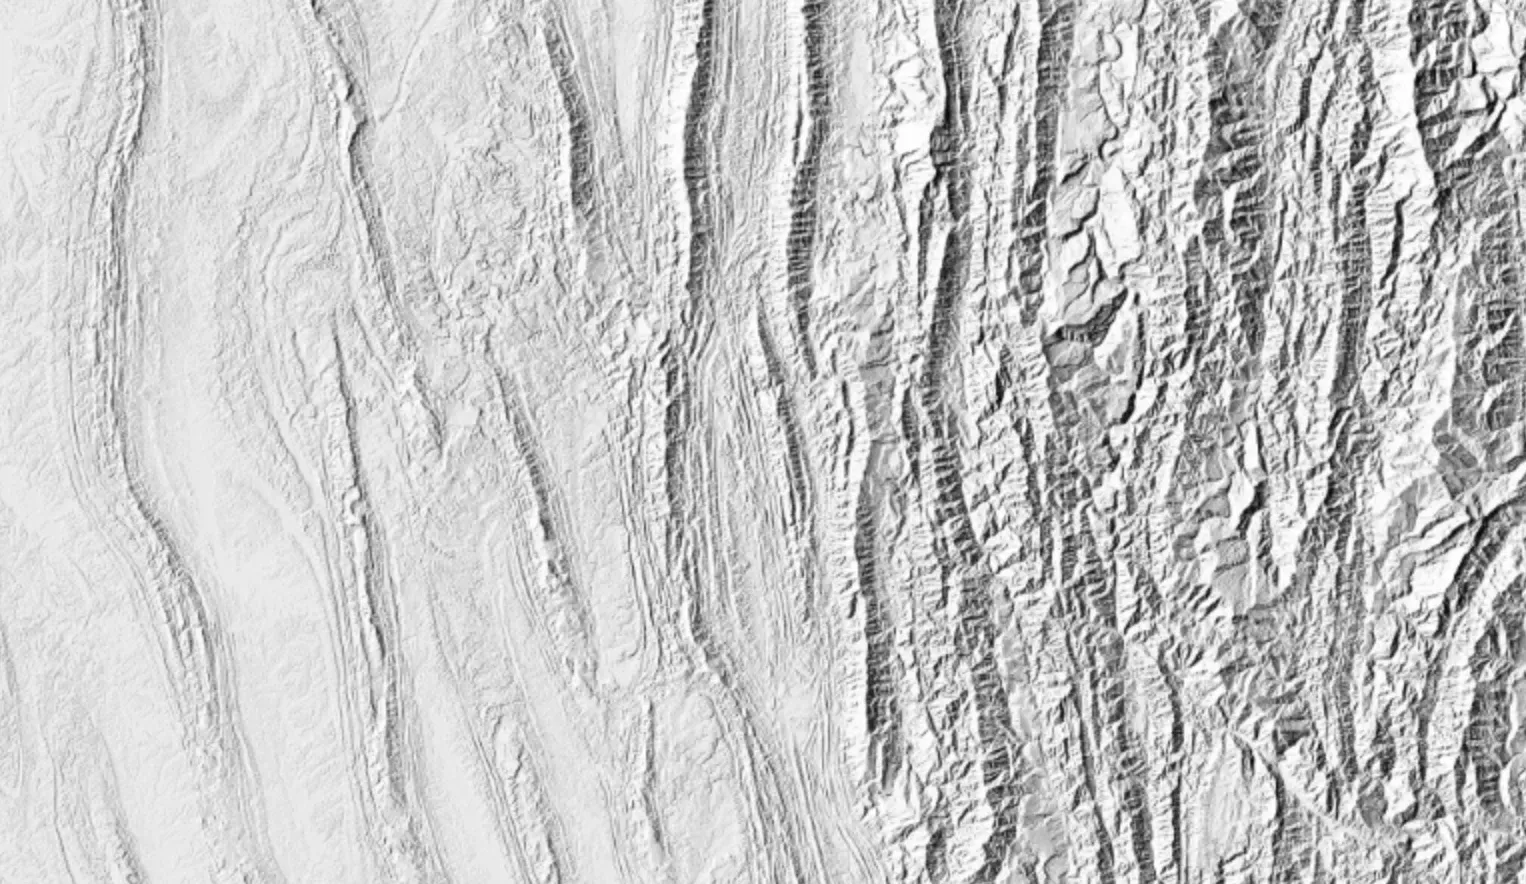 global hillshade with a high-resolution